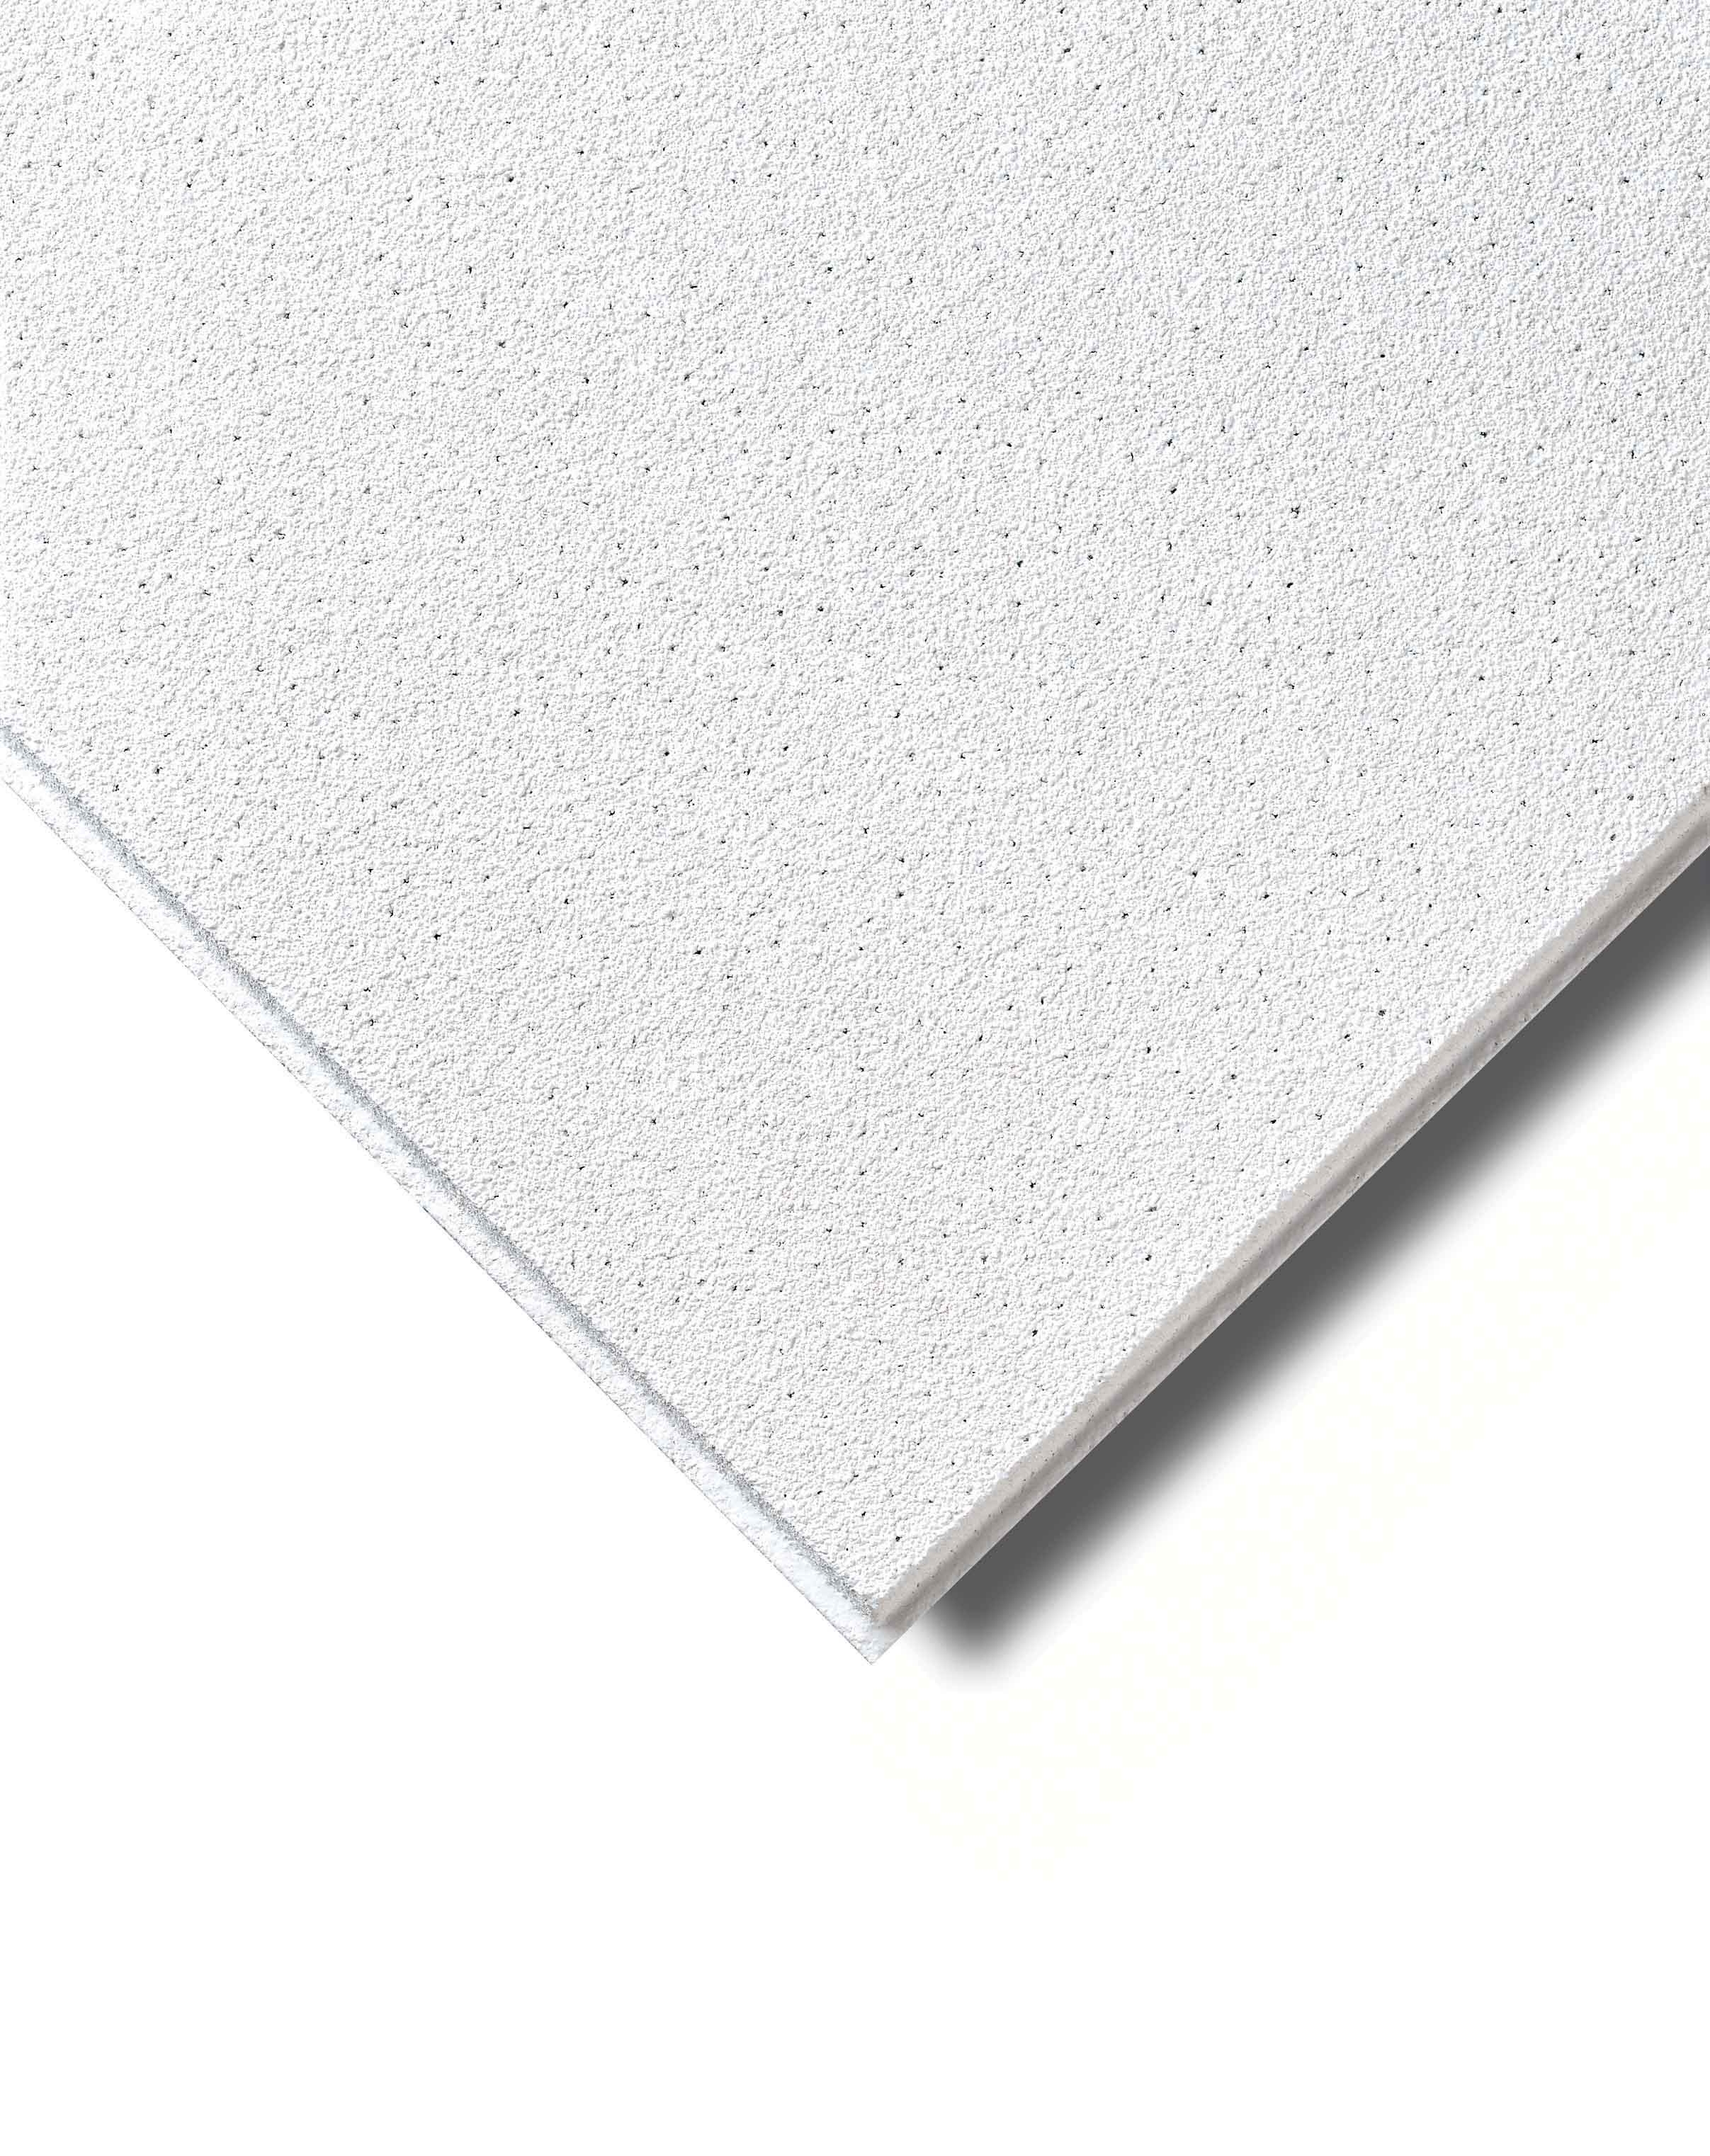 Armstrong Ceiling Tiles Dune Max Armstrong Ceiling Tiles Dune Max armstrong dune max 56ca nevill long interior systems 2414 X 3044